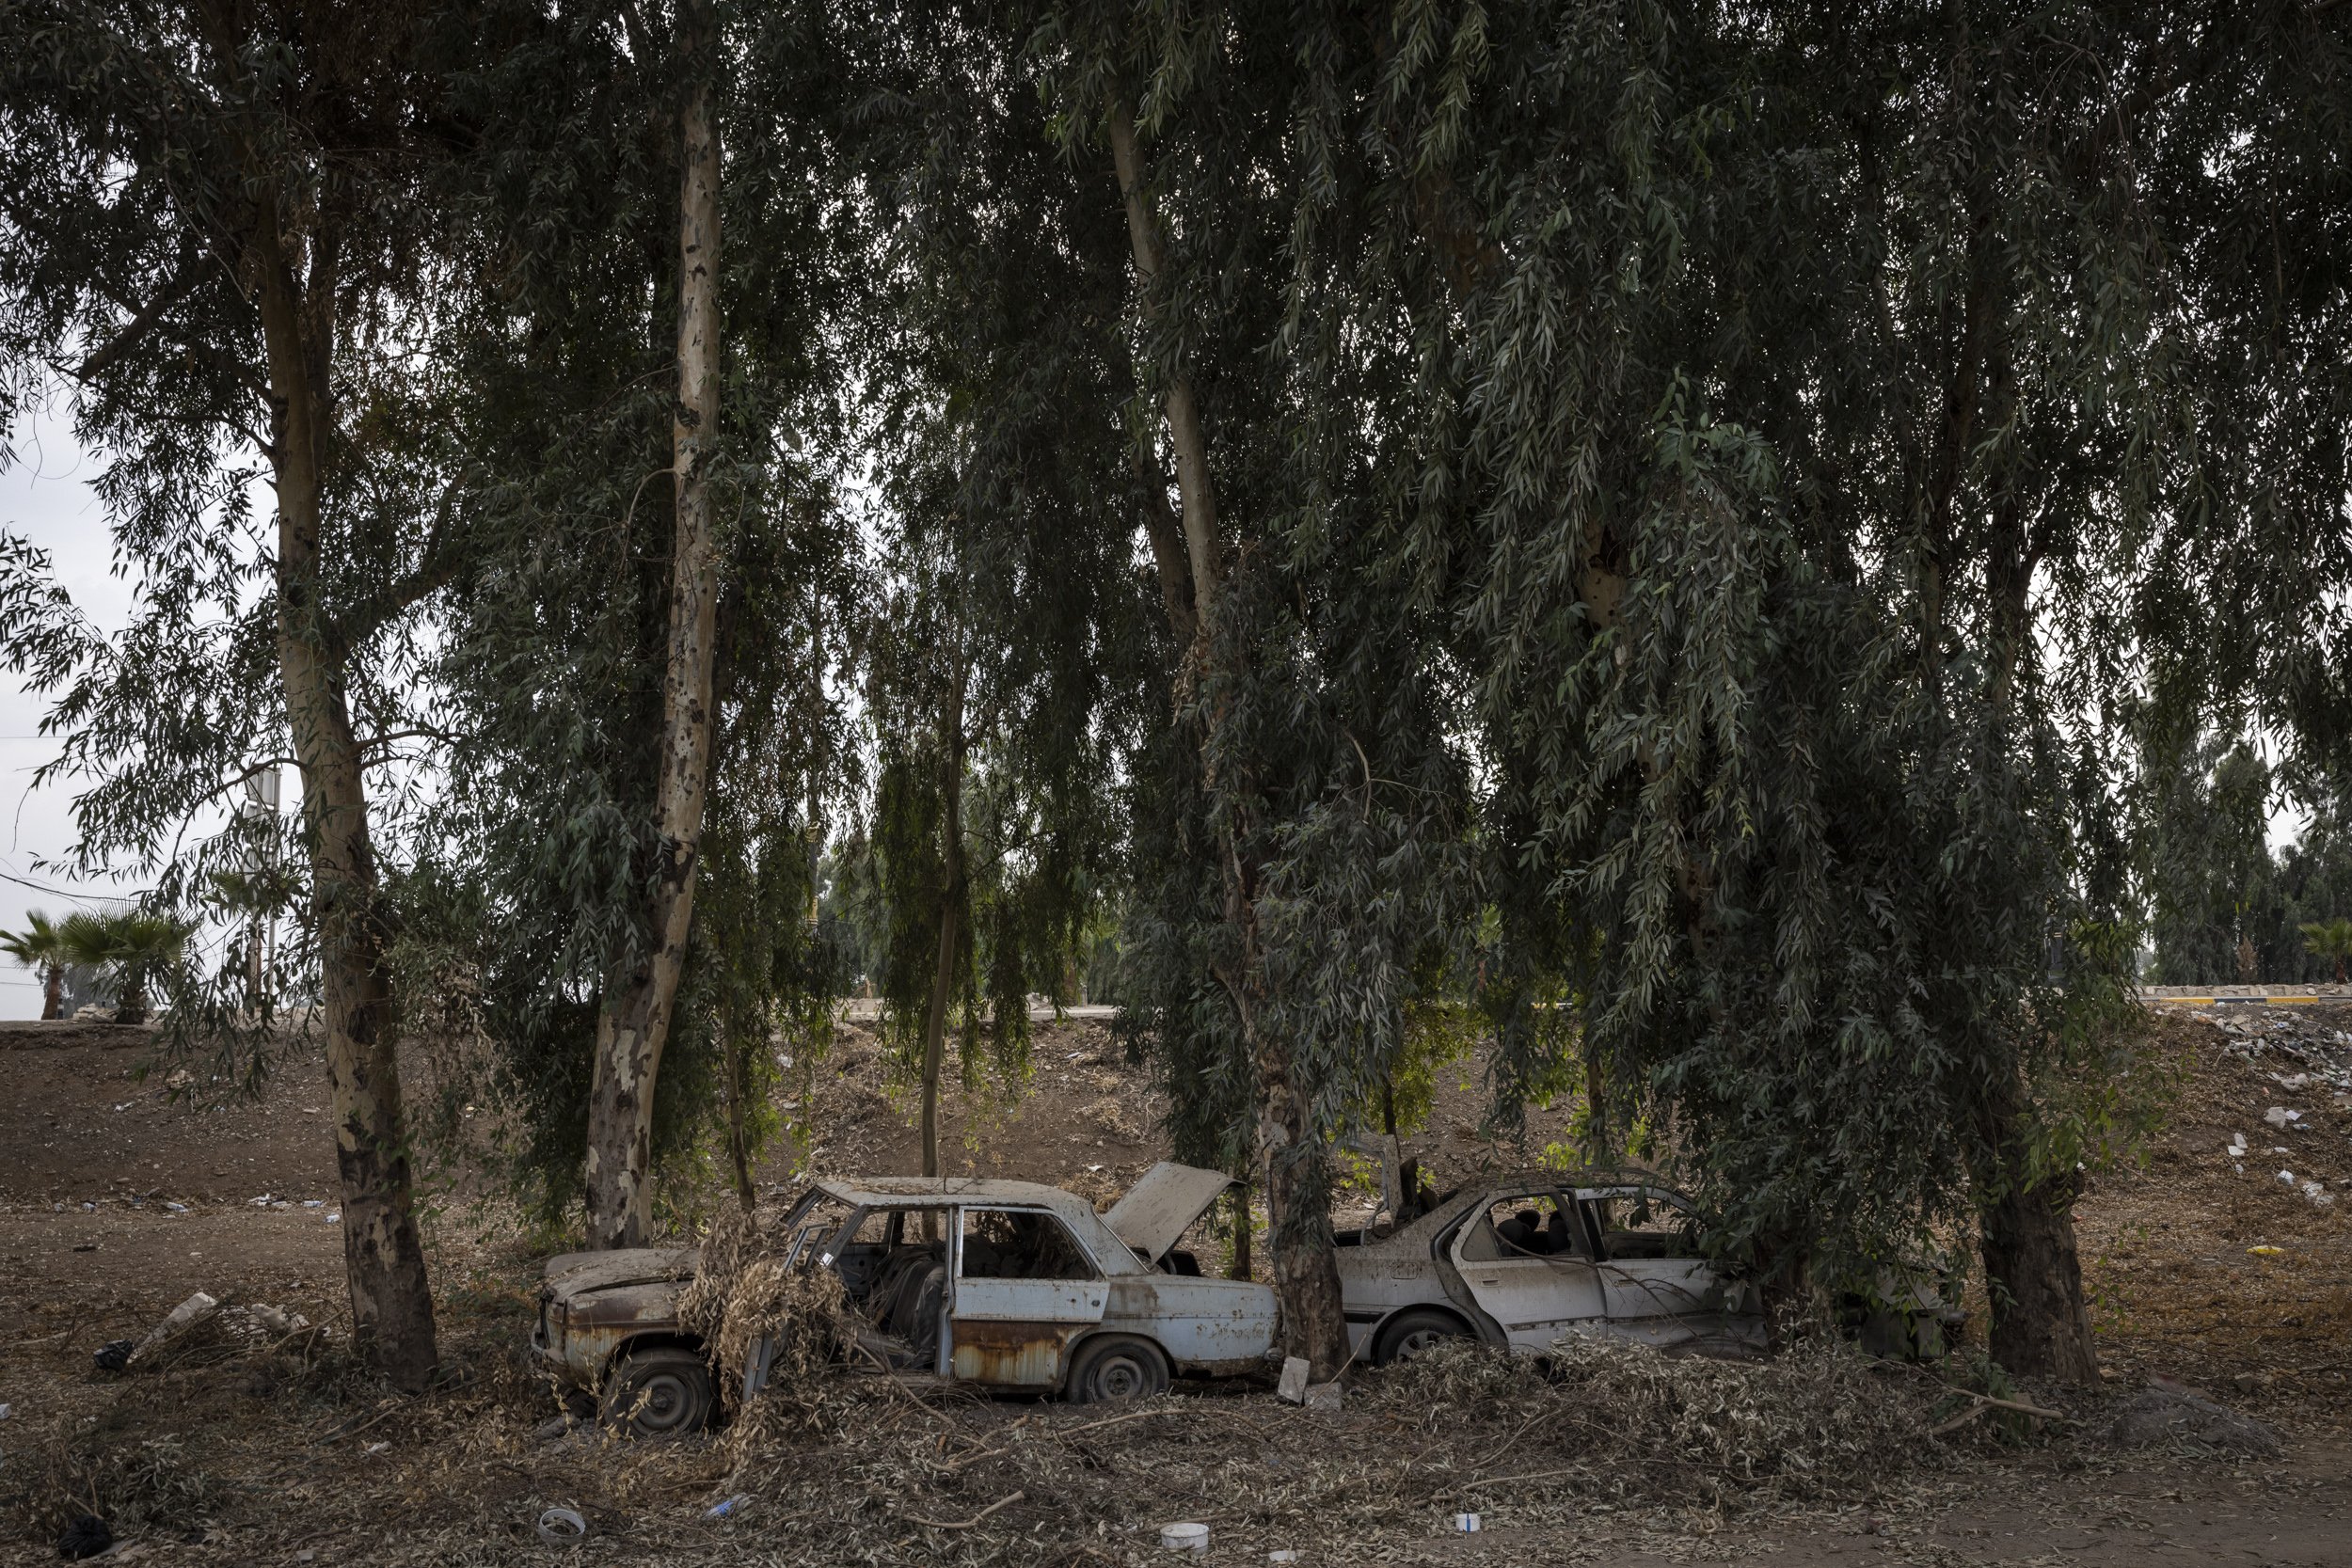  Destroyed cars near the site of a bombing that killed more than 15 people, including the children of Rafi al Iraqi.  